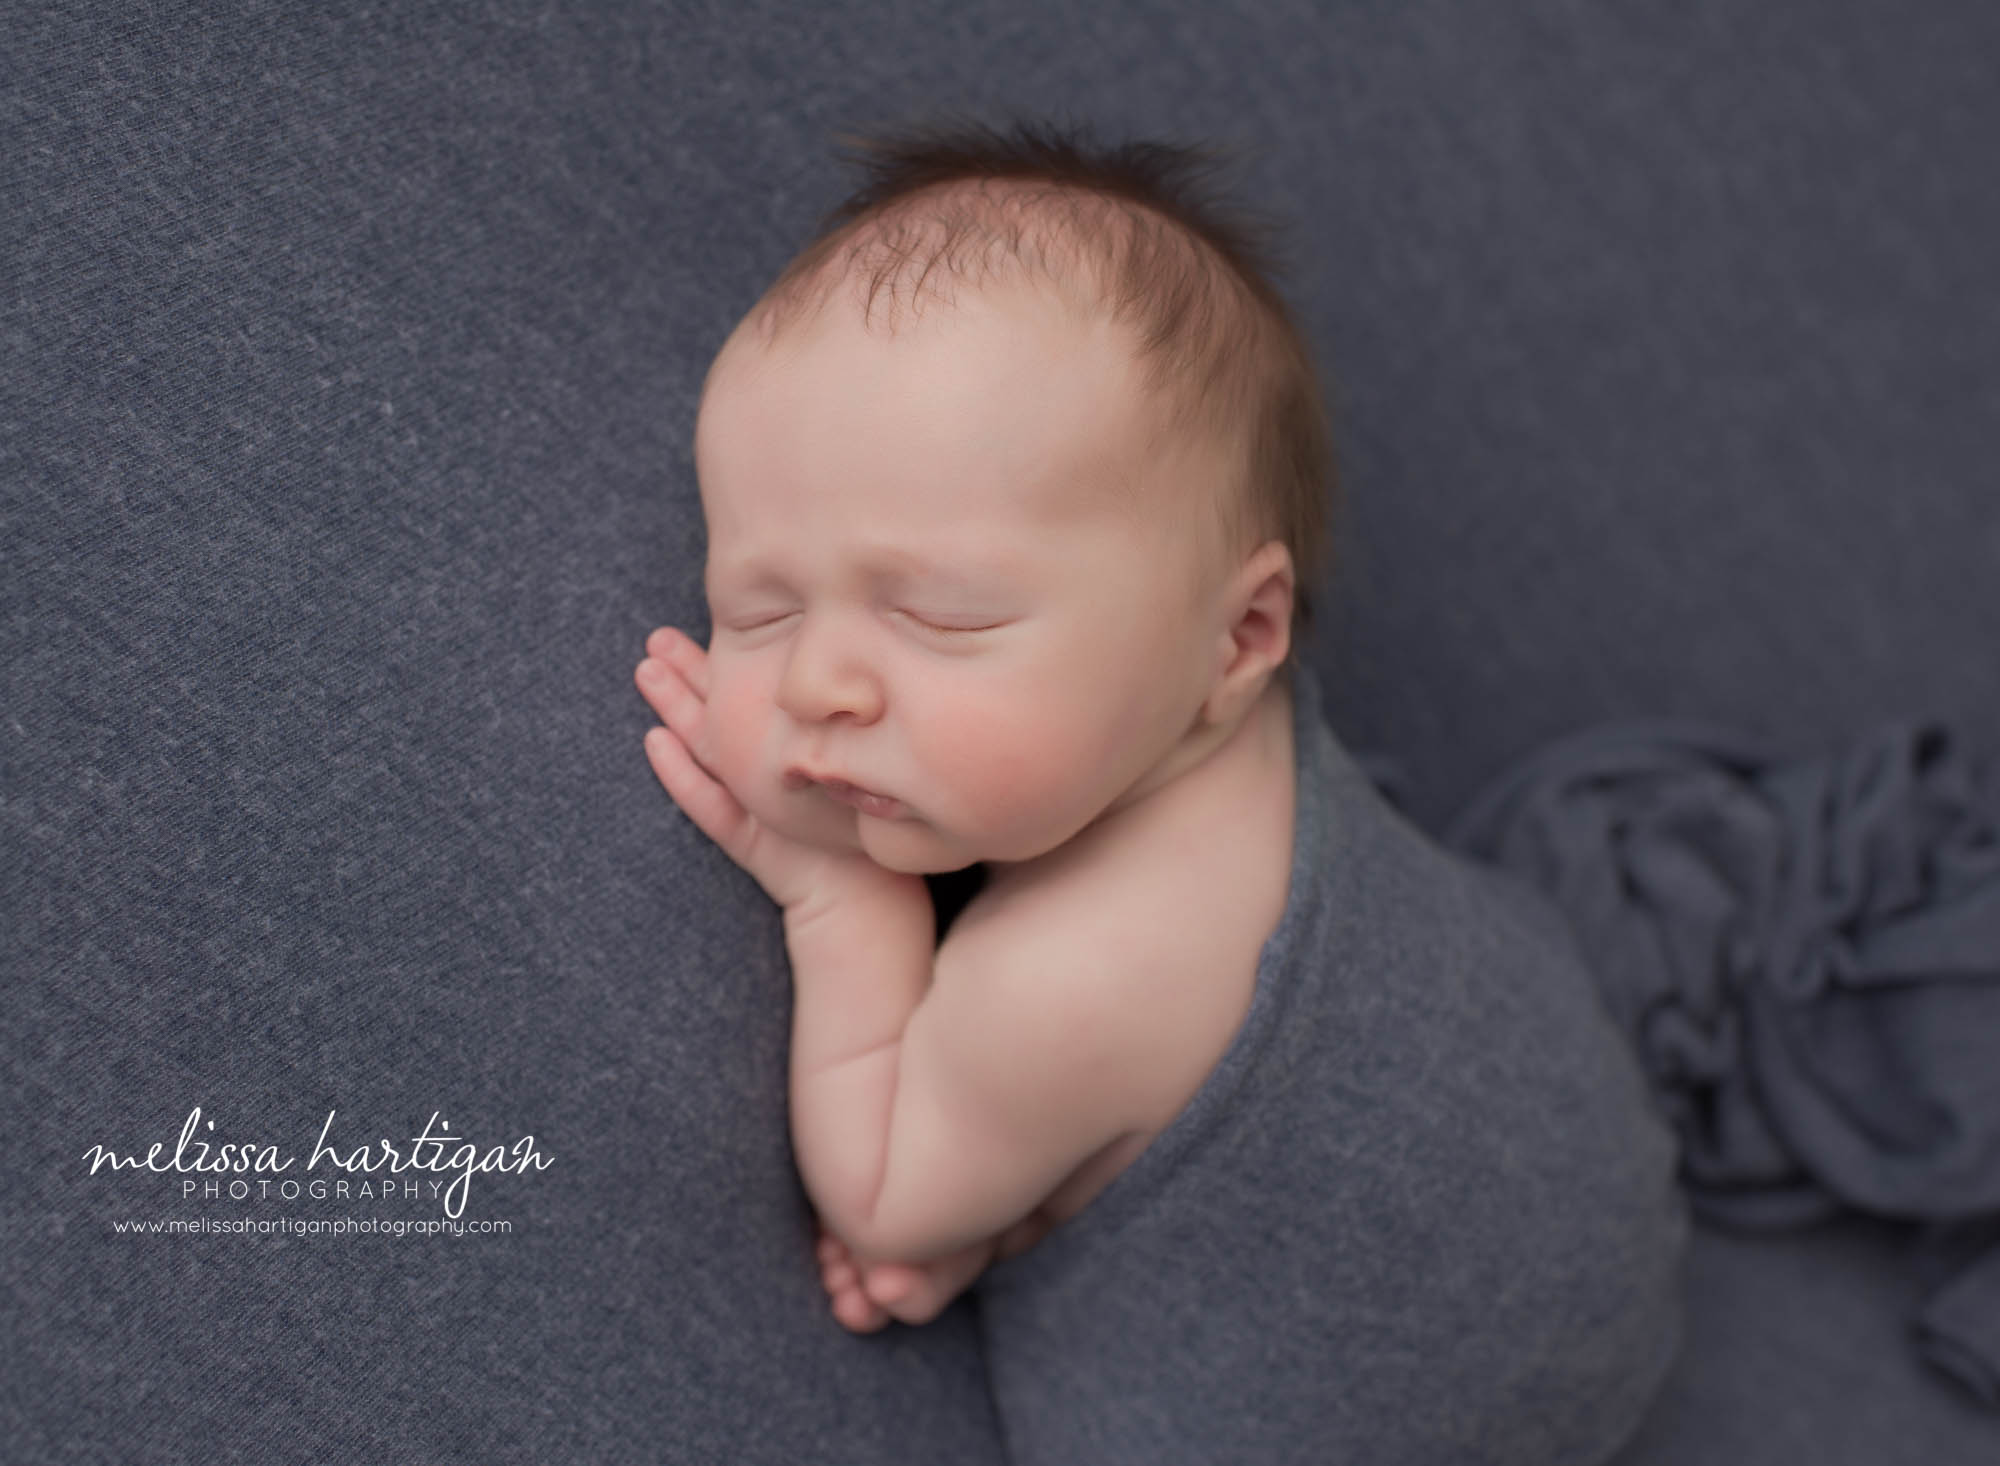 newborn baby boy posed on side taco with wrap drapped over enwborn photographer connecticut